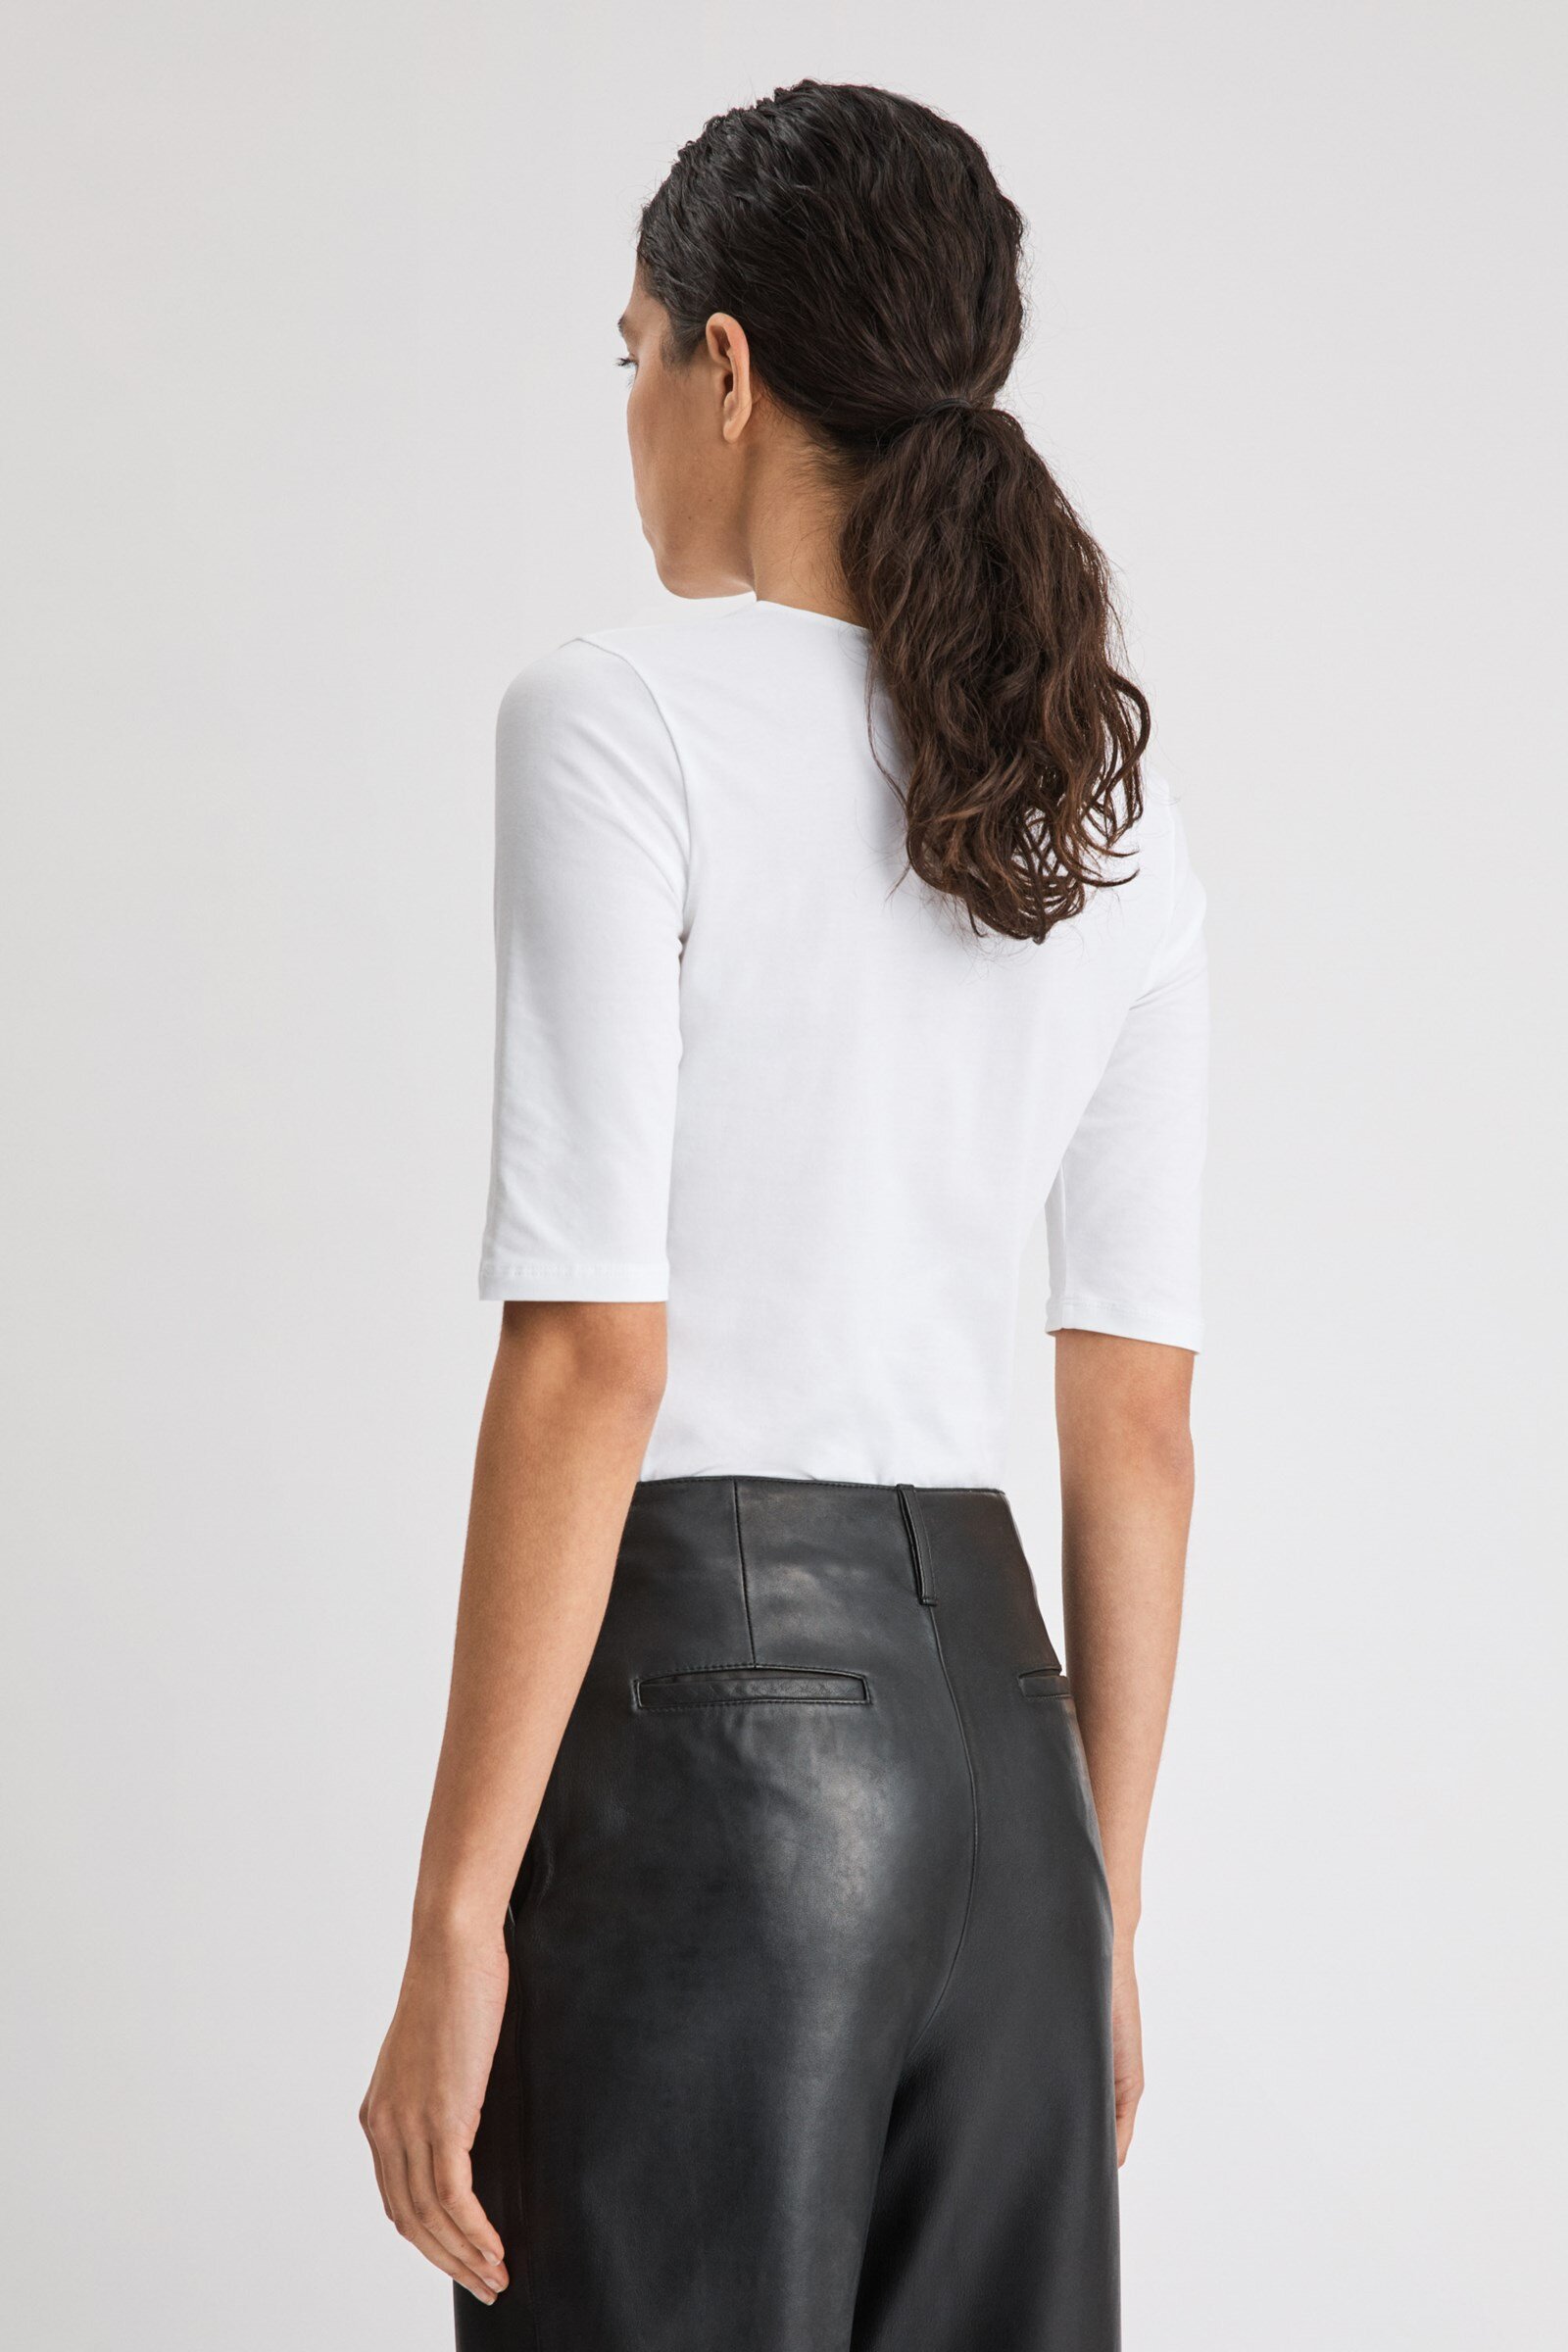 Filippa K - Cotton Stretch Elbow Sleeve (+ More Colours)